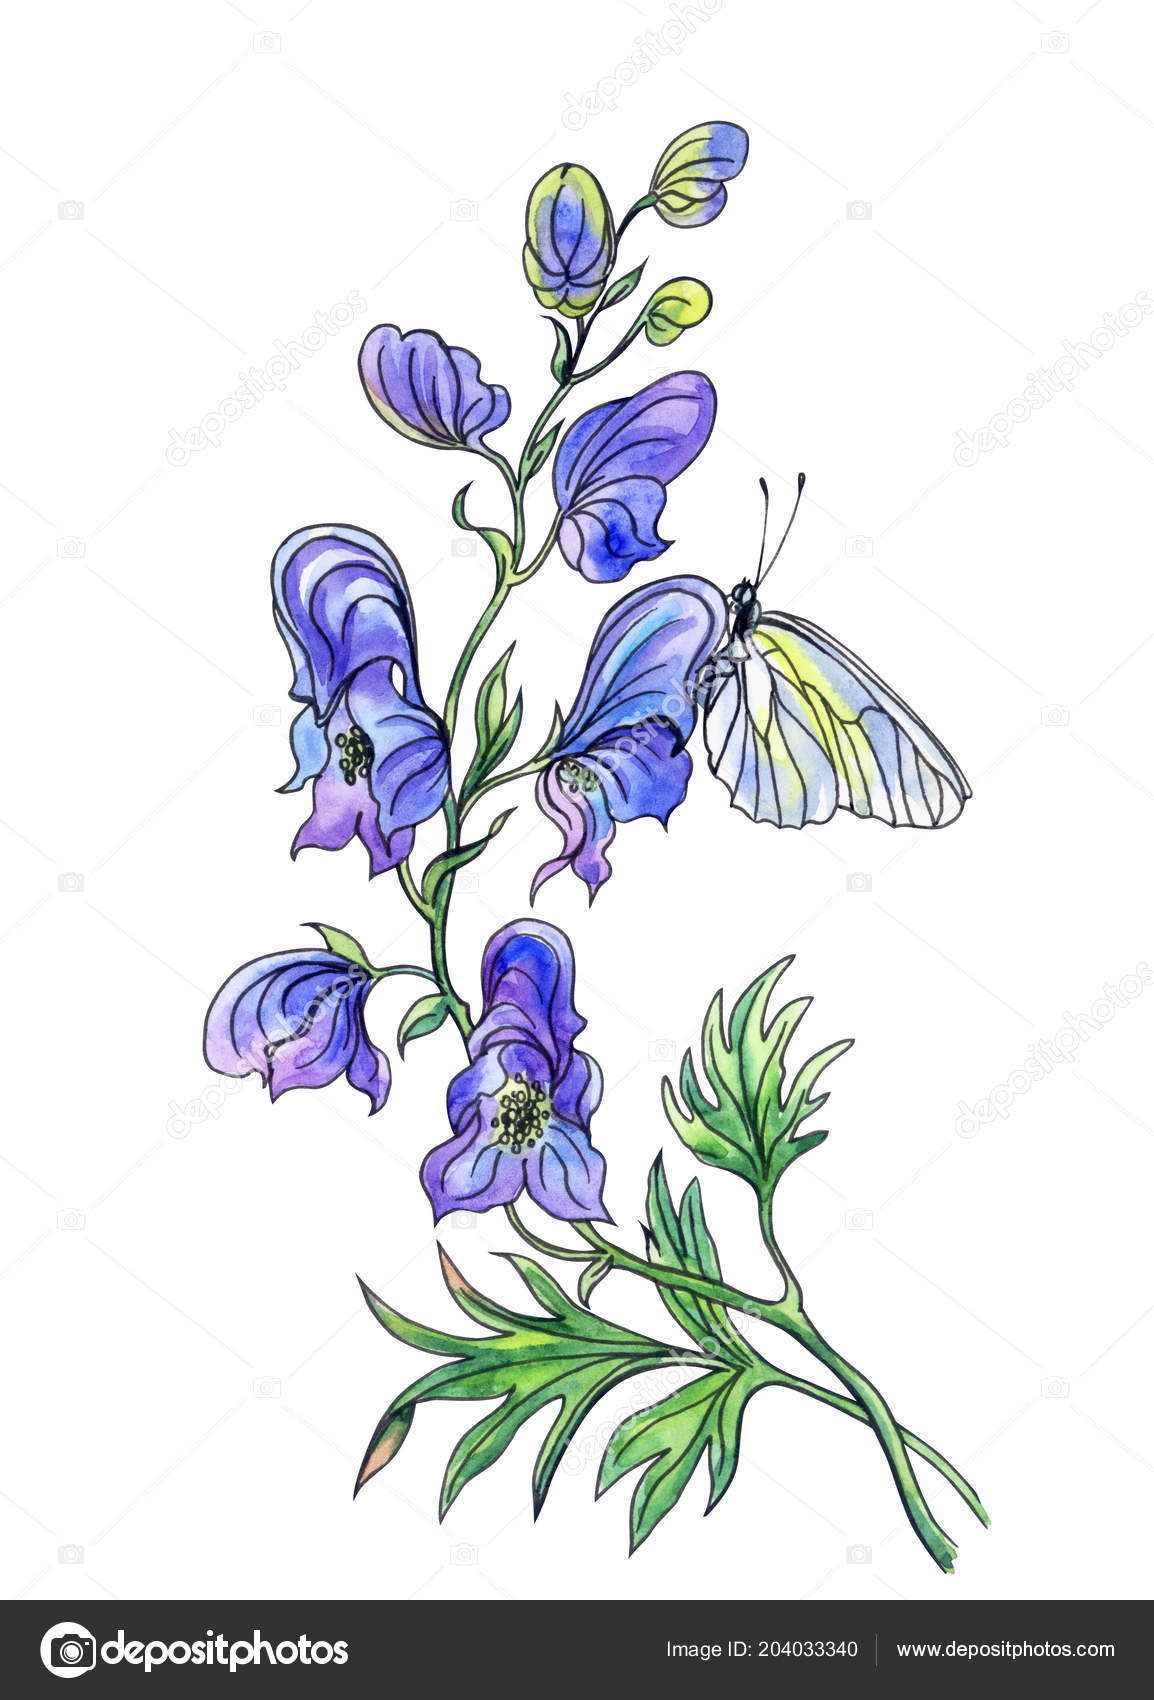 Aconite Flower Butterfly Watercolor Drawing Contour Isolated White Background Clipping Stock Photo C Ollga P 09 204033340